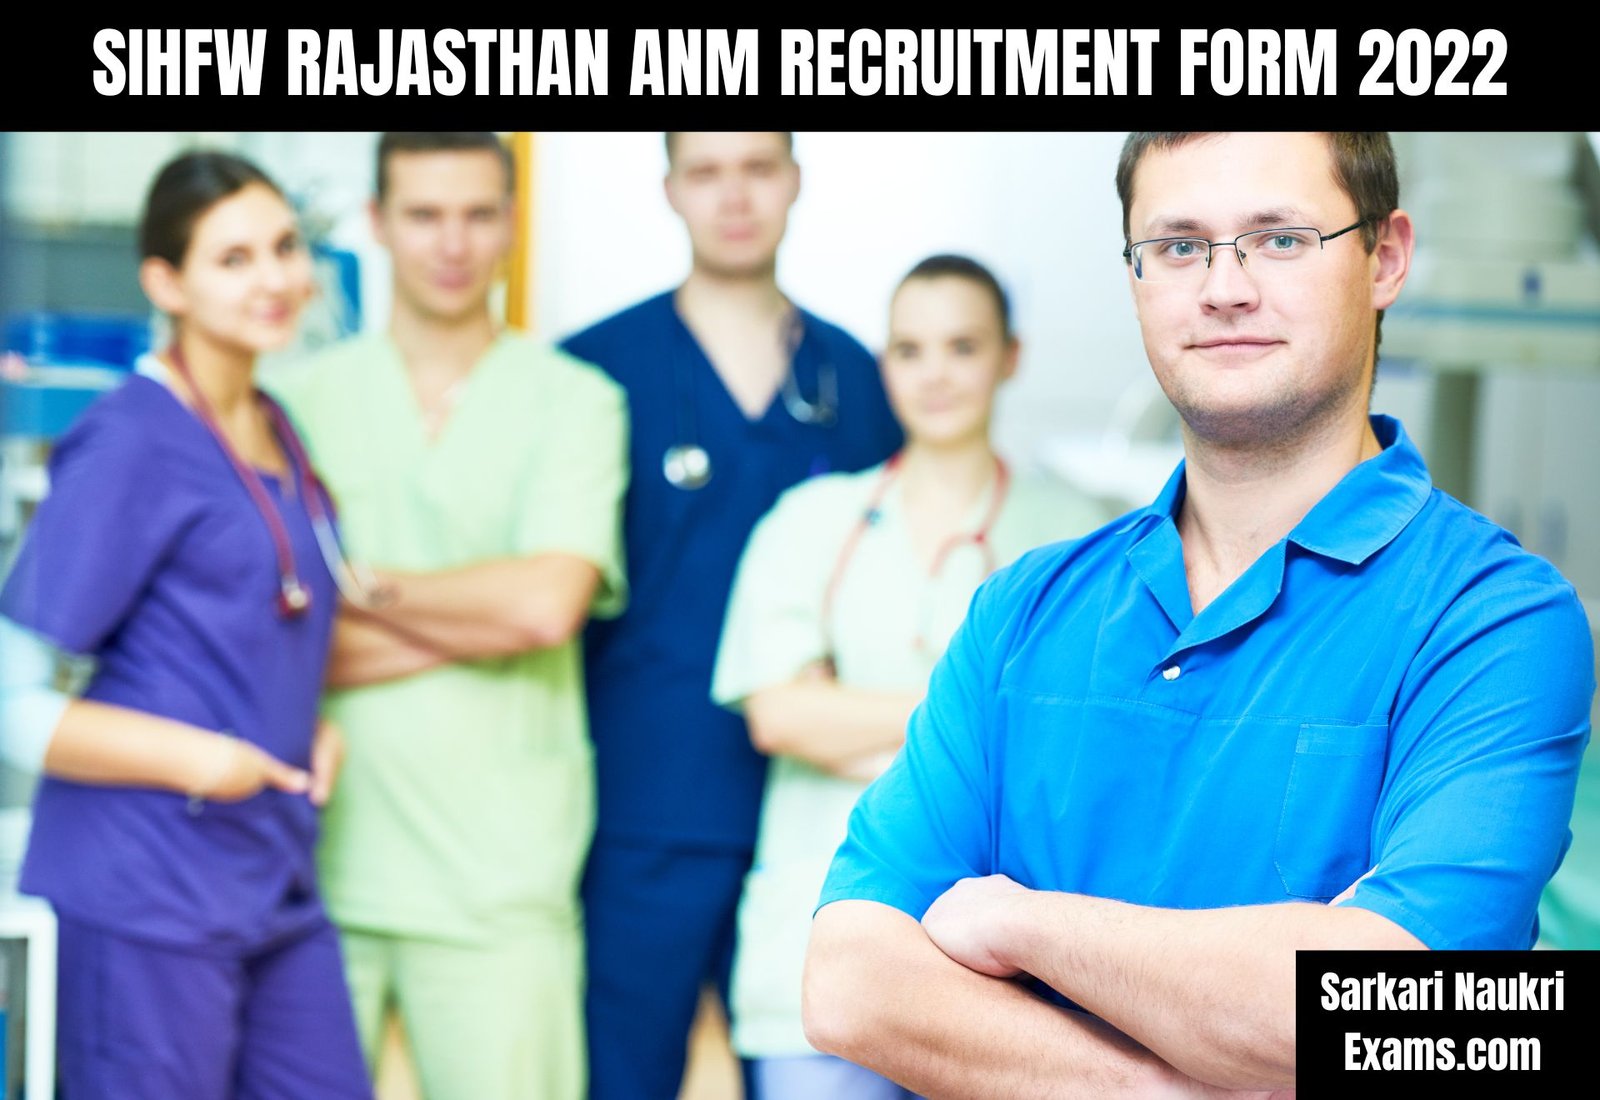 SIHFW Rajasthan ANM, Lab Technician and Assistant Radiographer Recruitment Form 2022